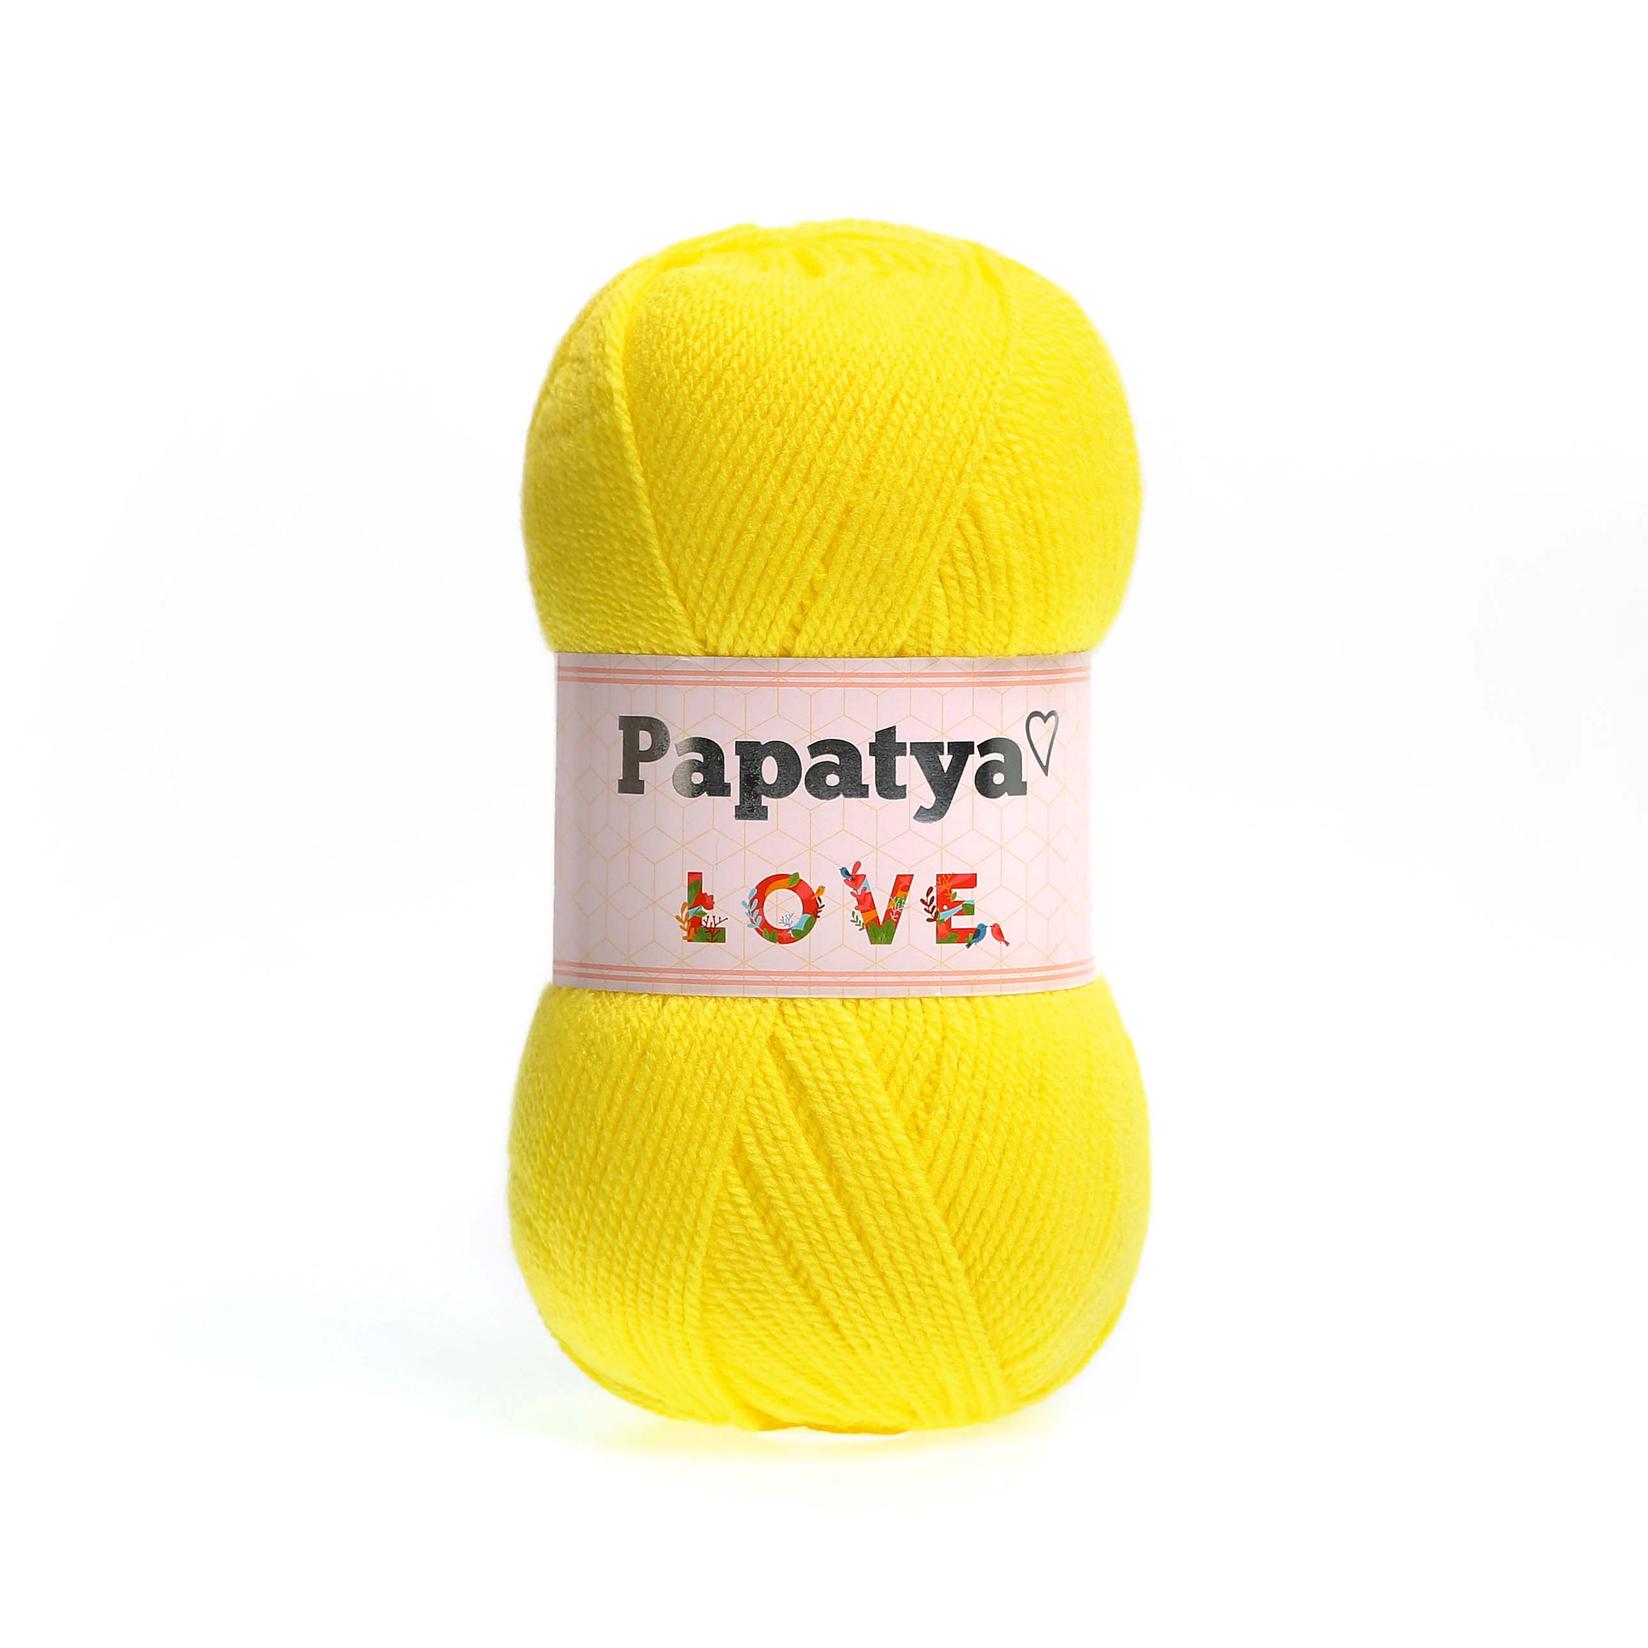 Selected image for PAPATYA Vunica Love 7850